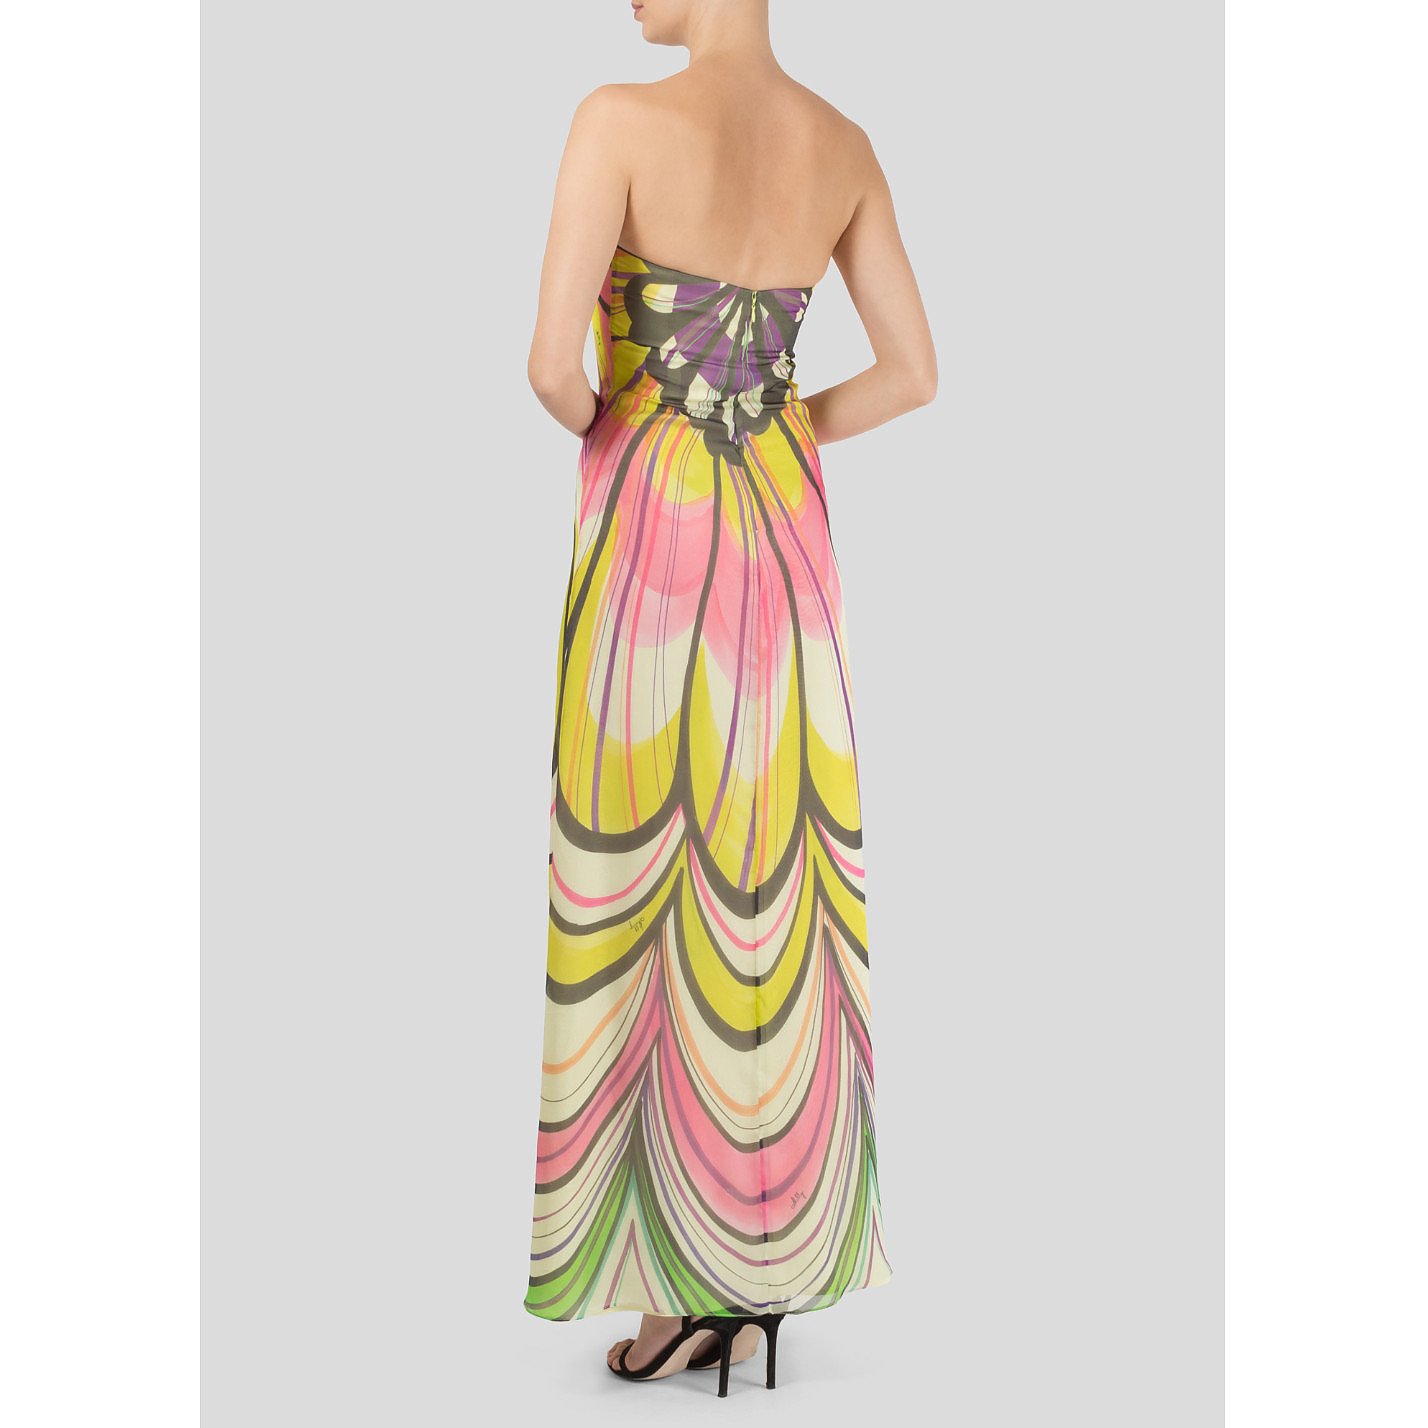 Rent Or Buy Milly New York Printed Maxi Dress From Mywardrobehq Com